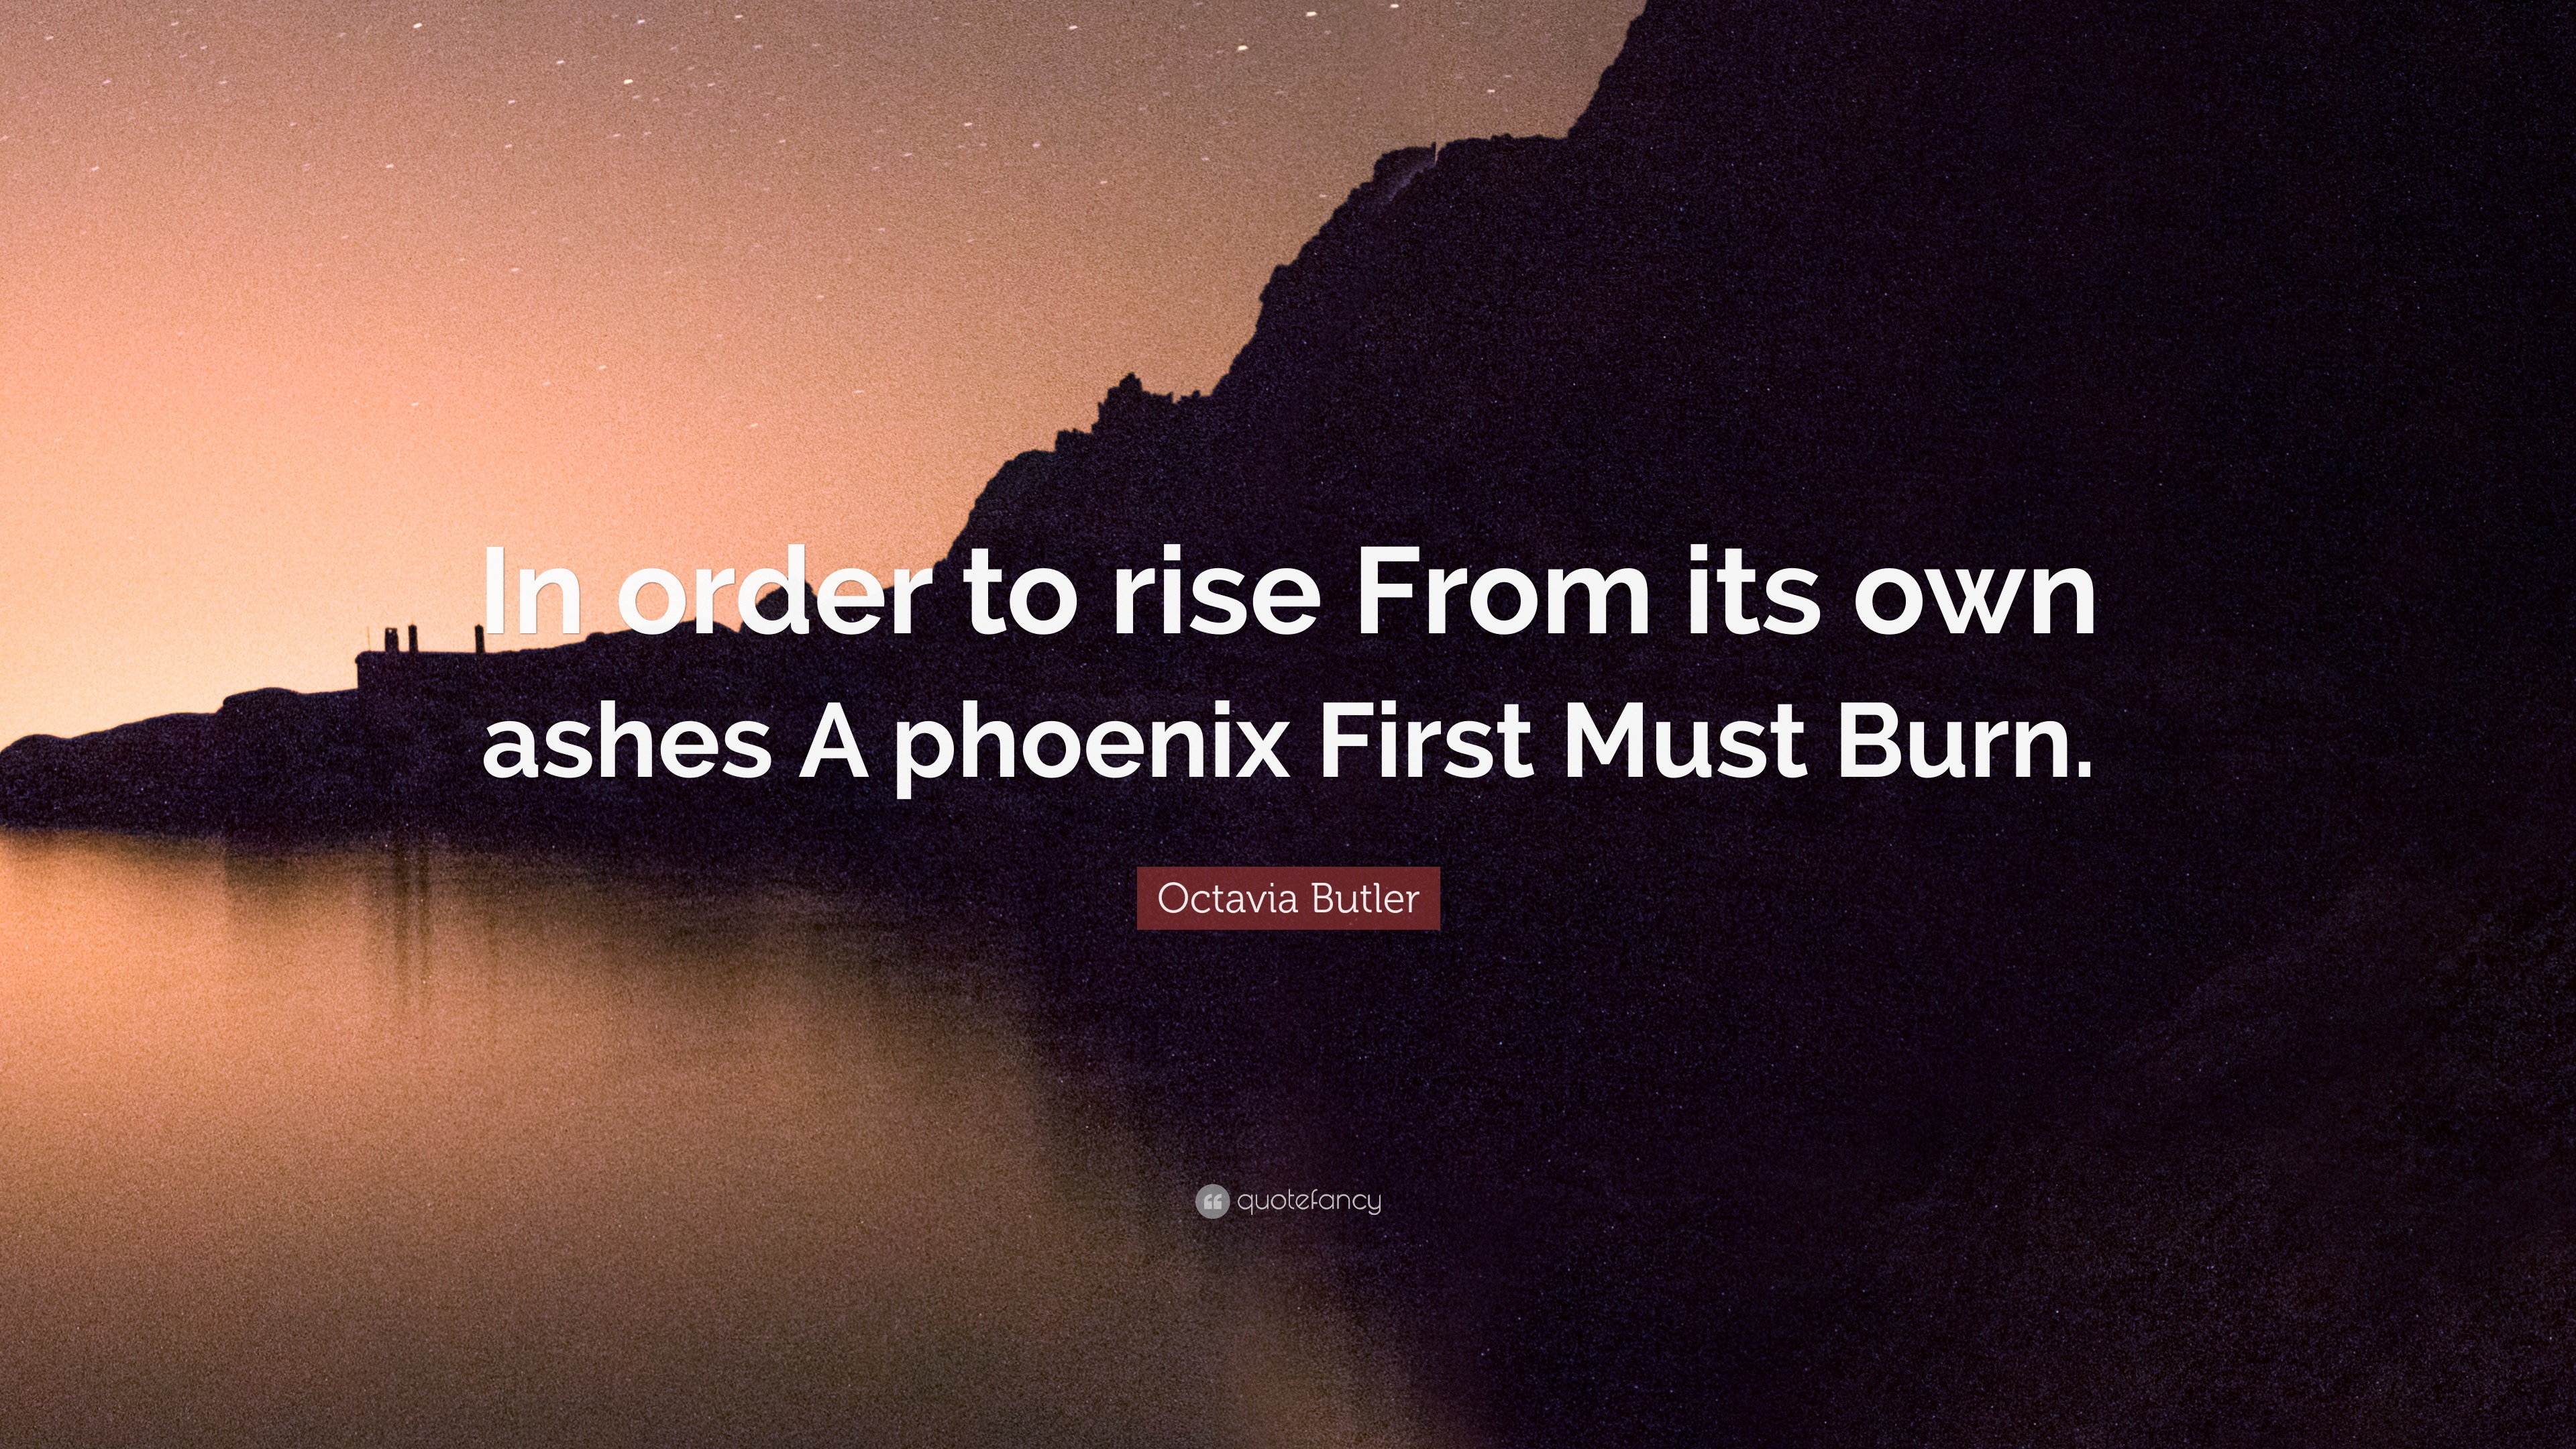 Octavia Butler Quote In Order To Rise From Its Own Ashes A Phoenix First Must Burn